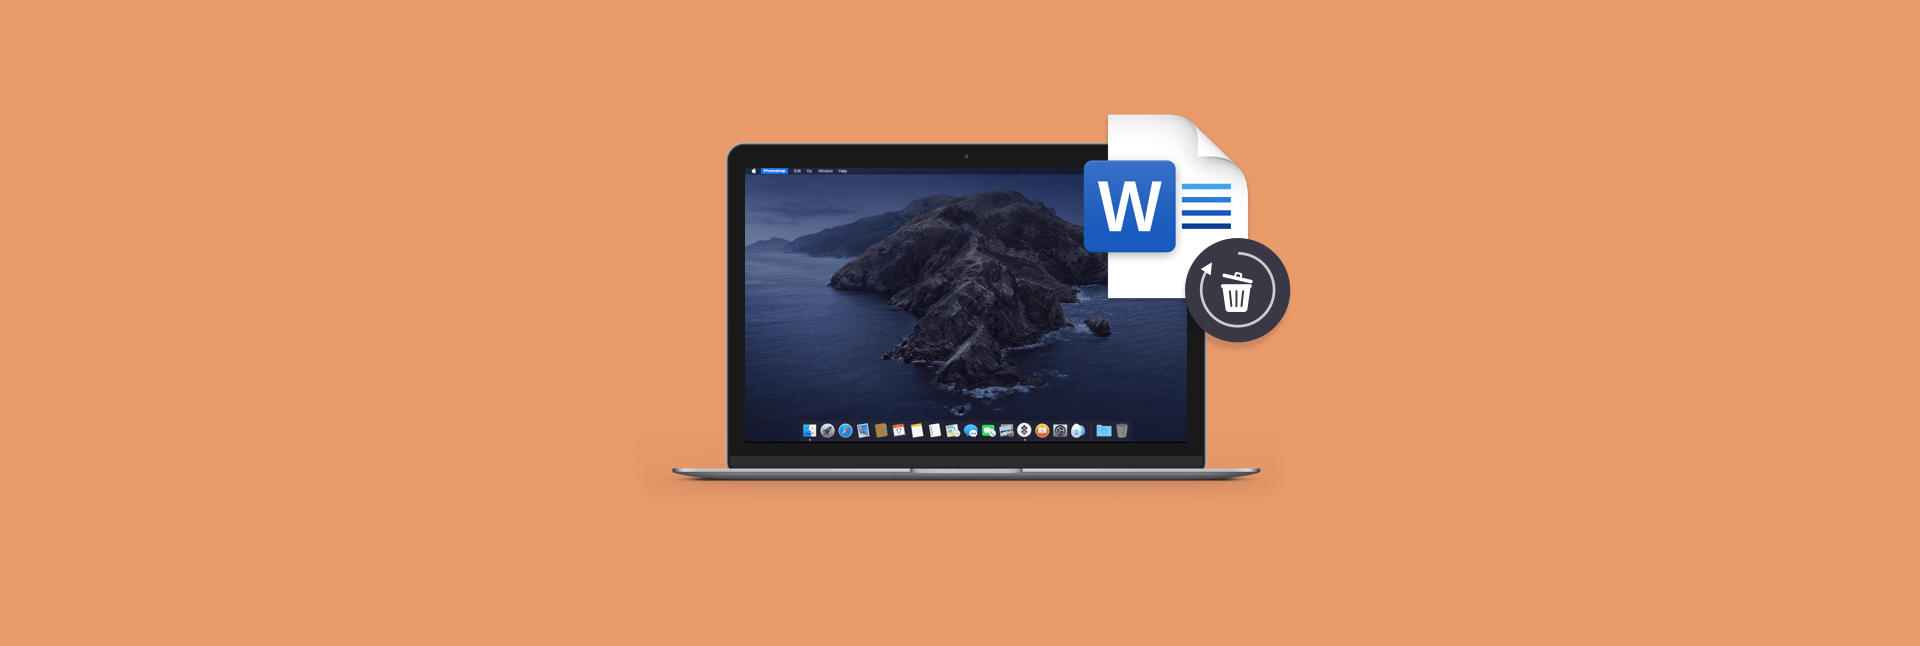 word 2016 mac file recovery